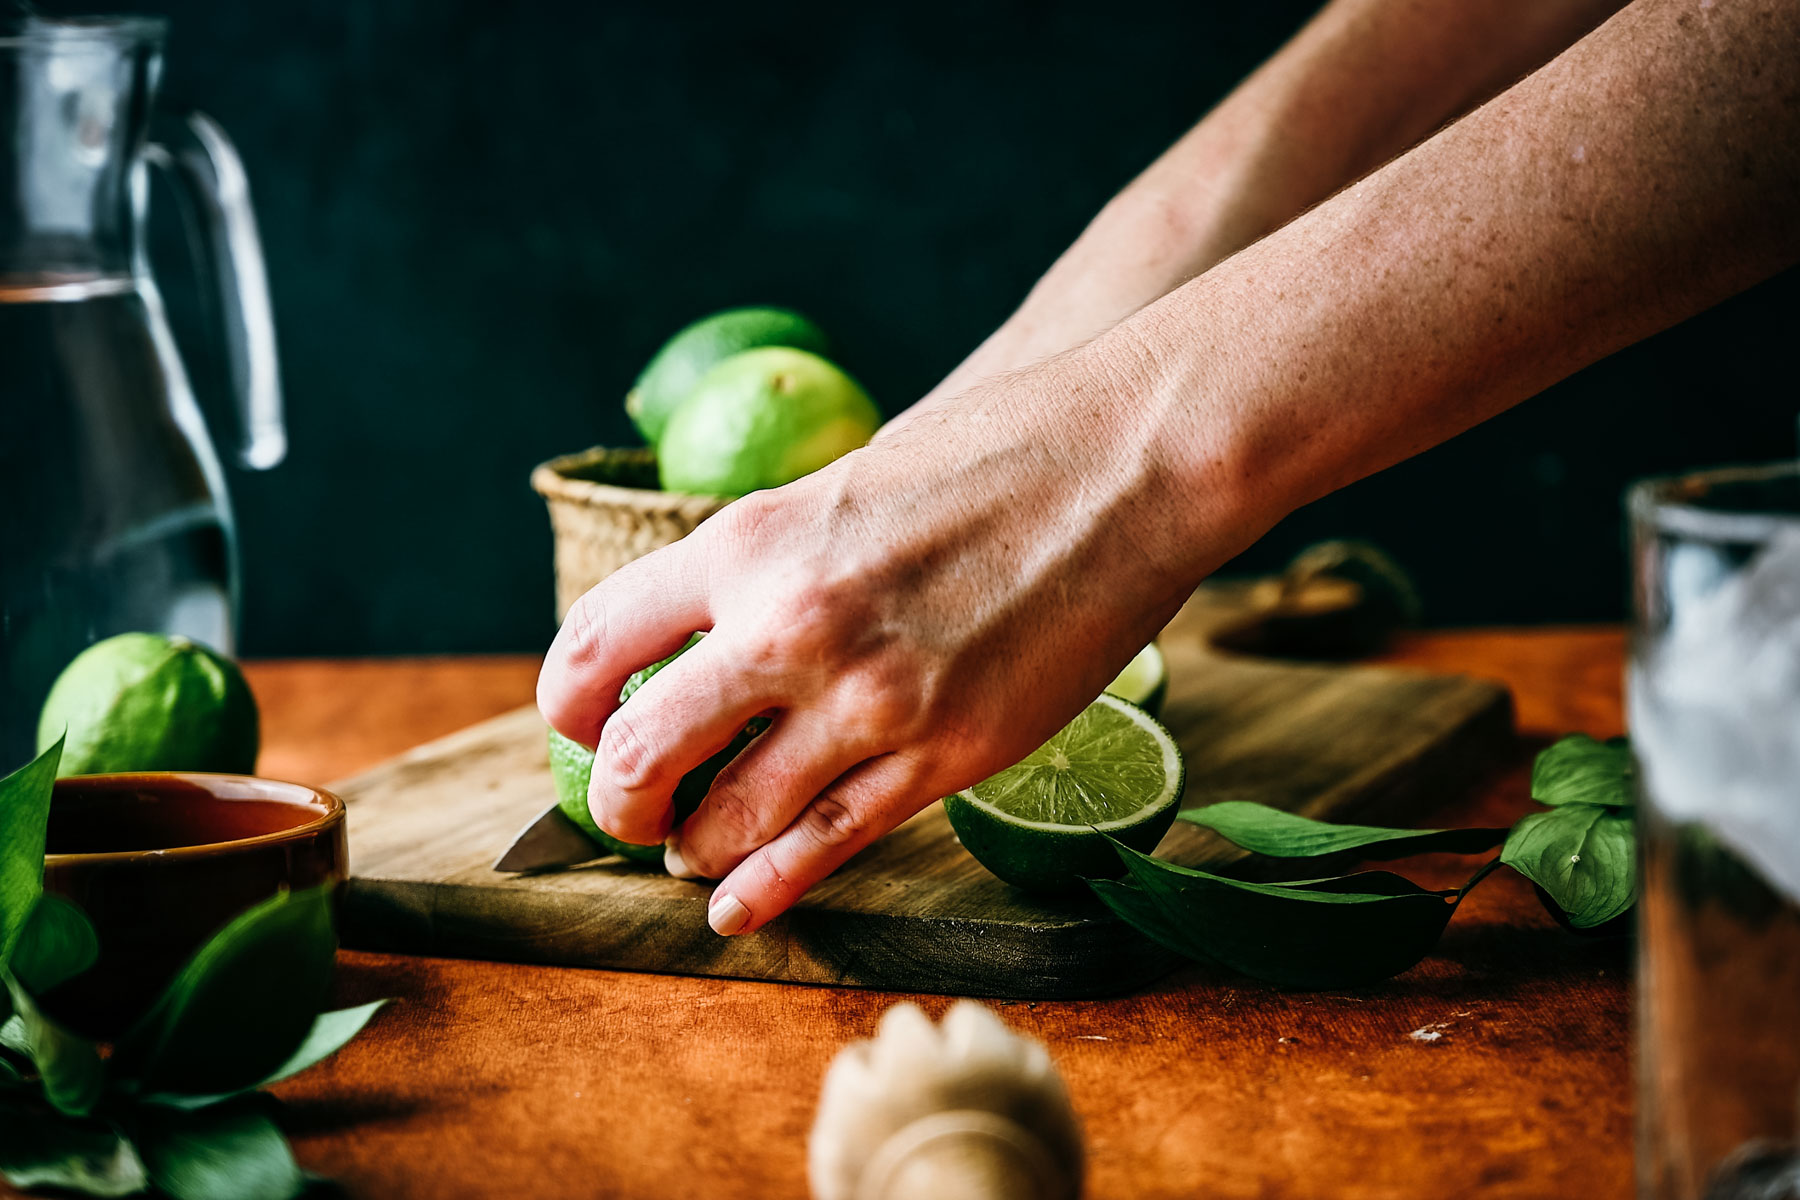 A person slicing a lime on a wooden cutting board, surrounded by fresh greens and a pitcher of water in the background.